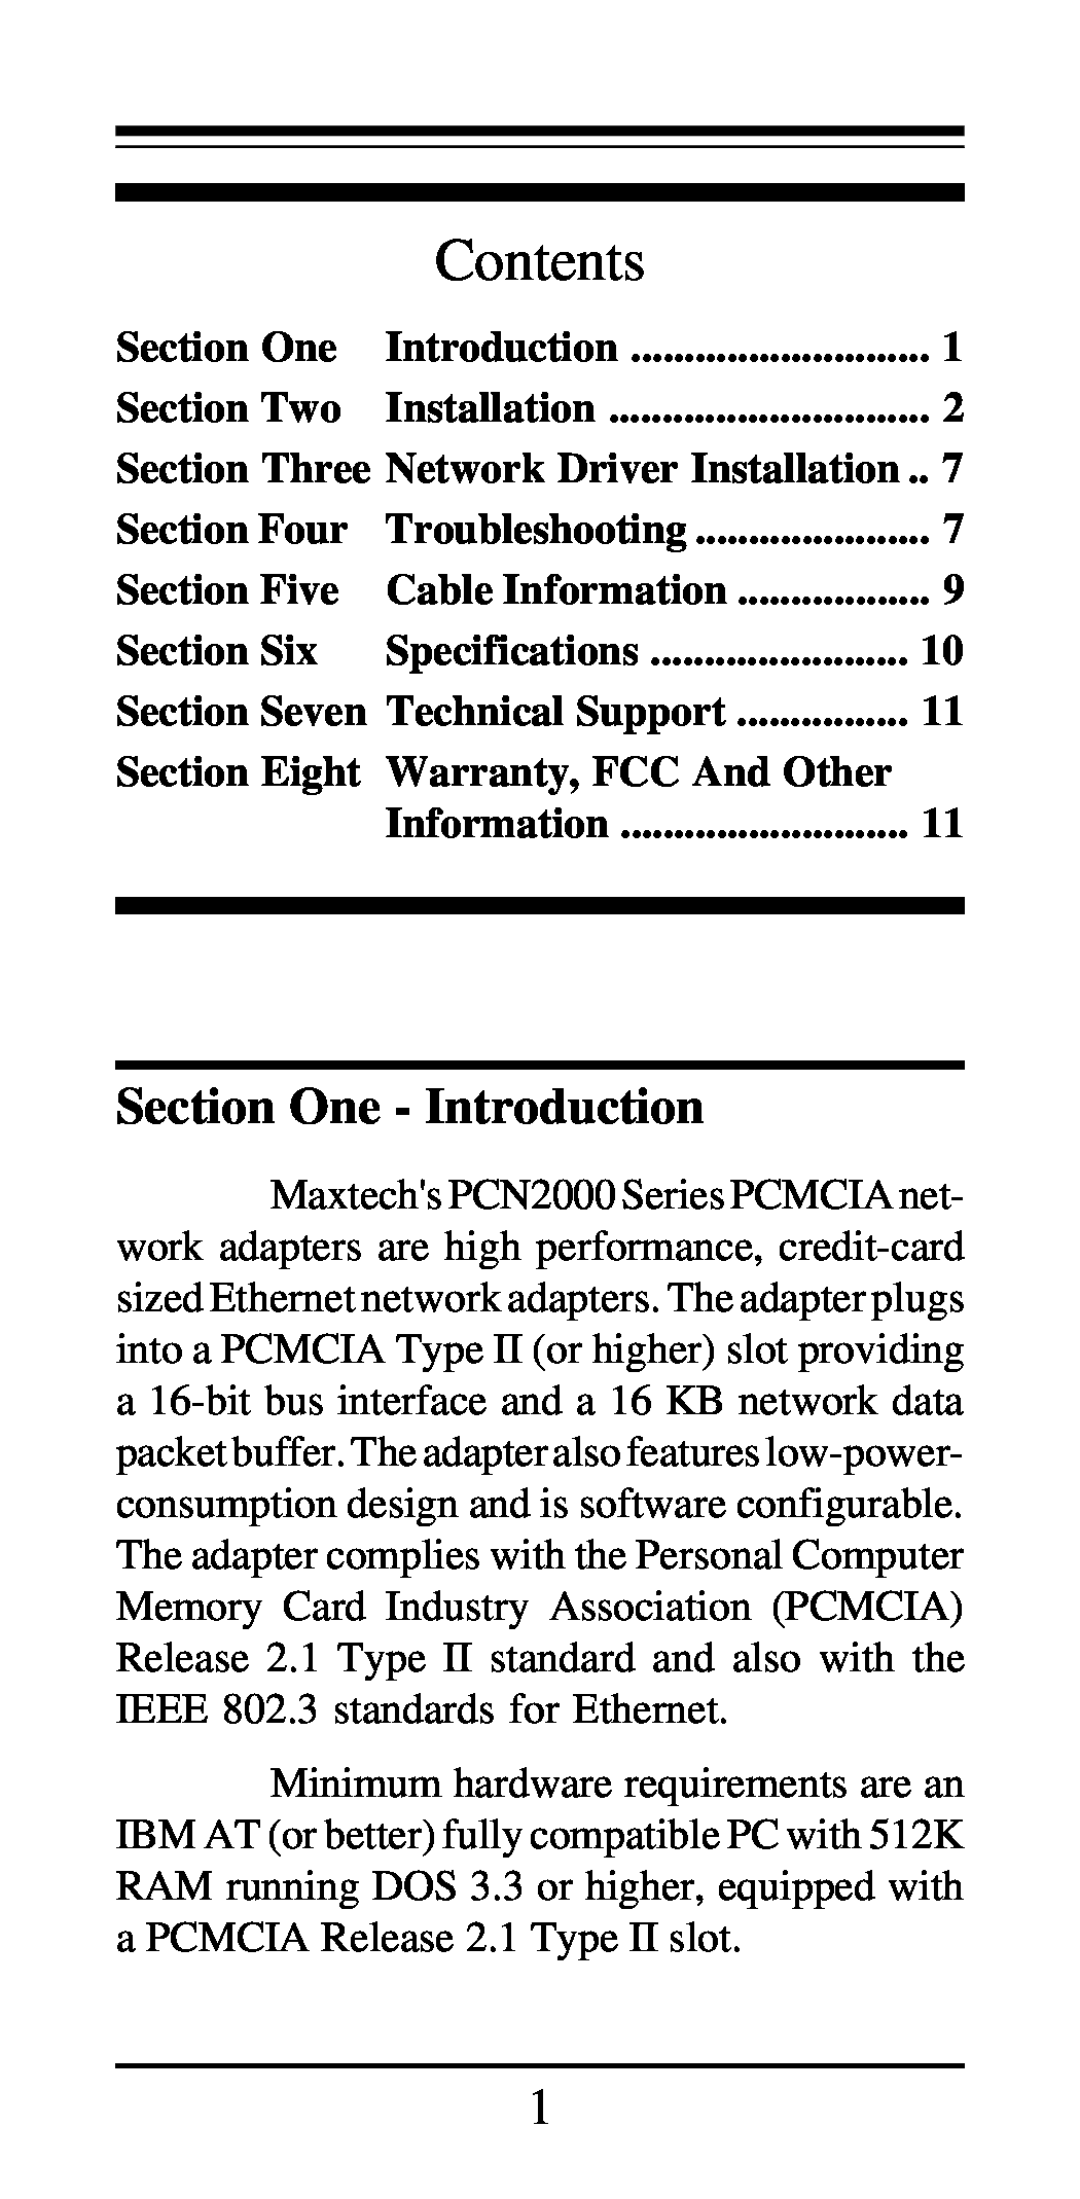 MaxTech PCN2000 Series Contents, Section One - Introduction, Section Two, Installation, Section Four, Troubleshooting 